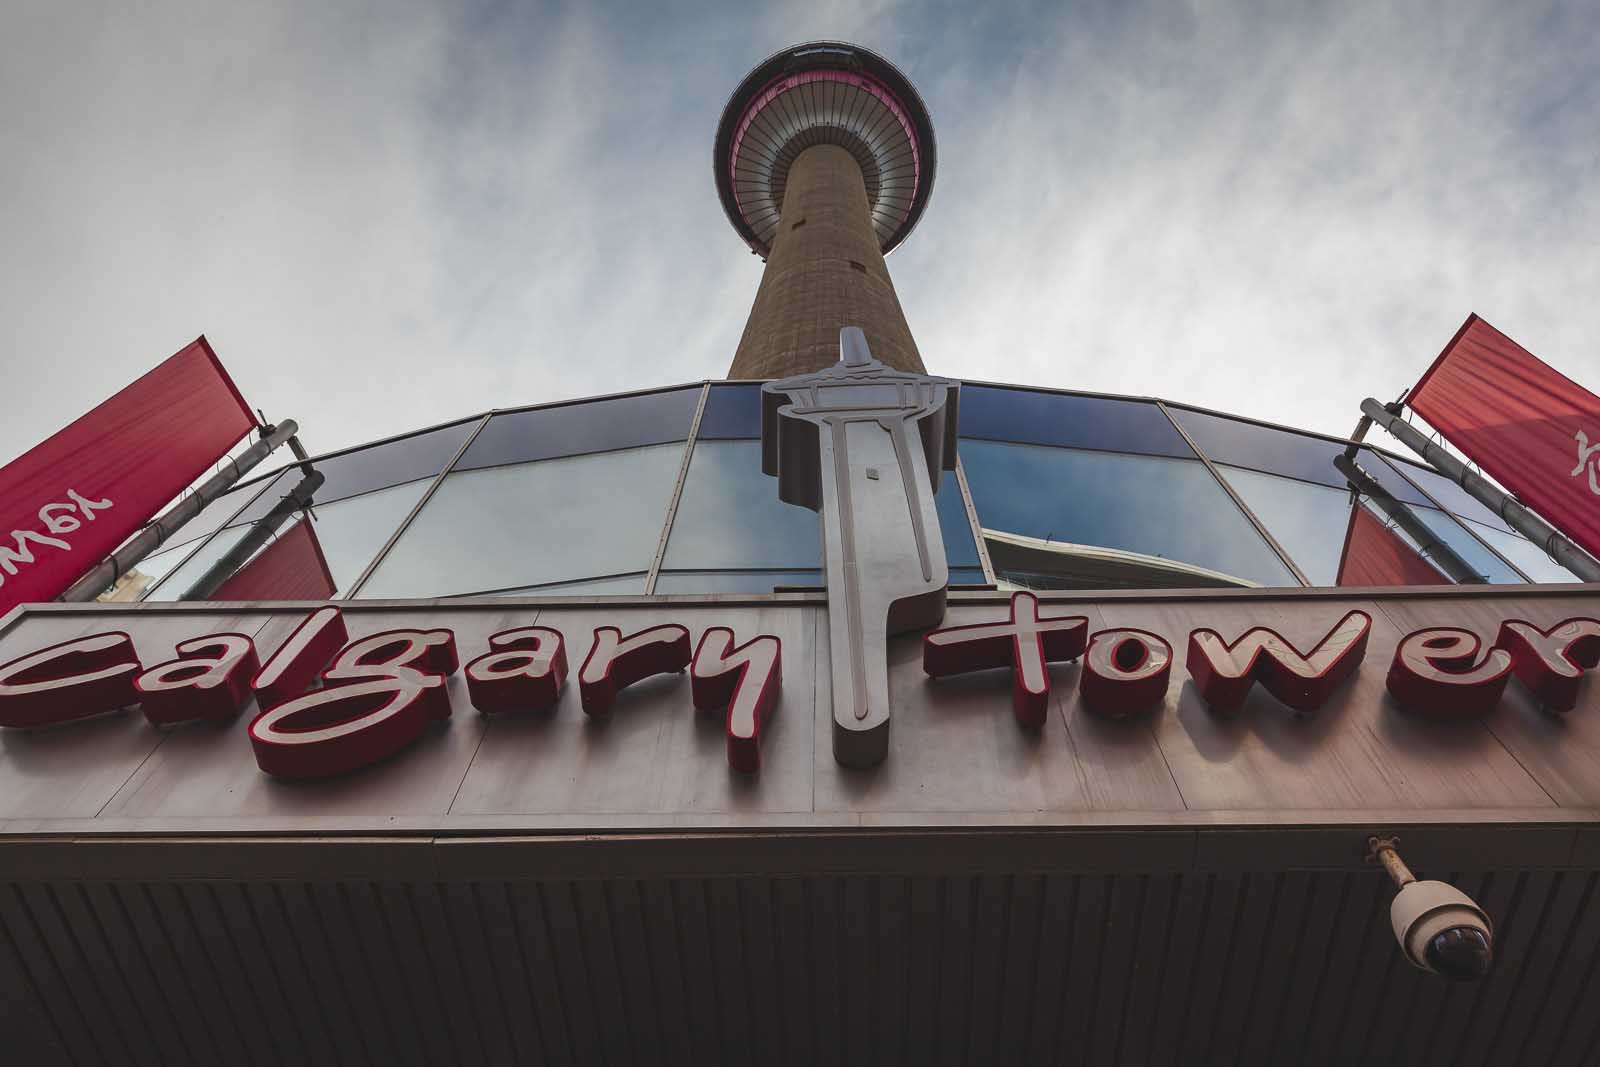 calgary tower alberta places to visit